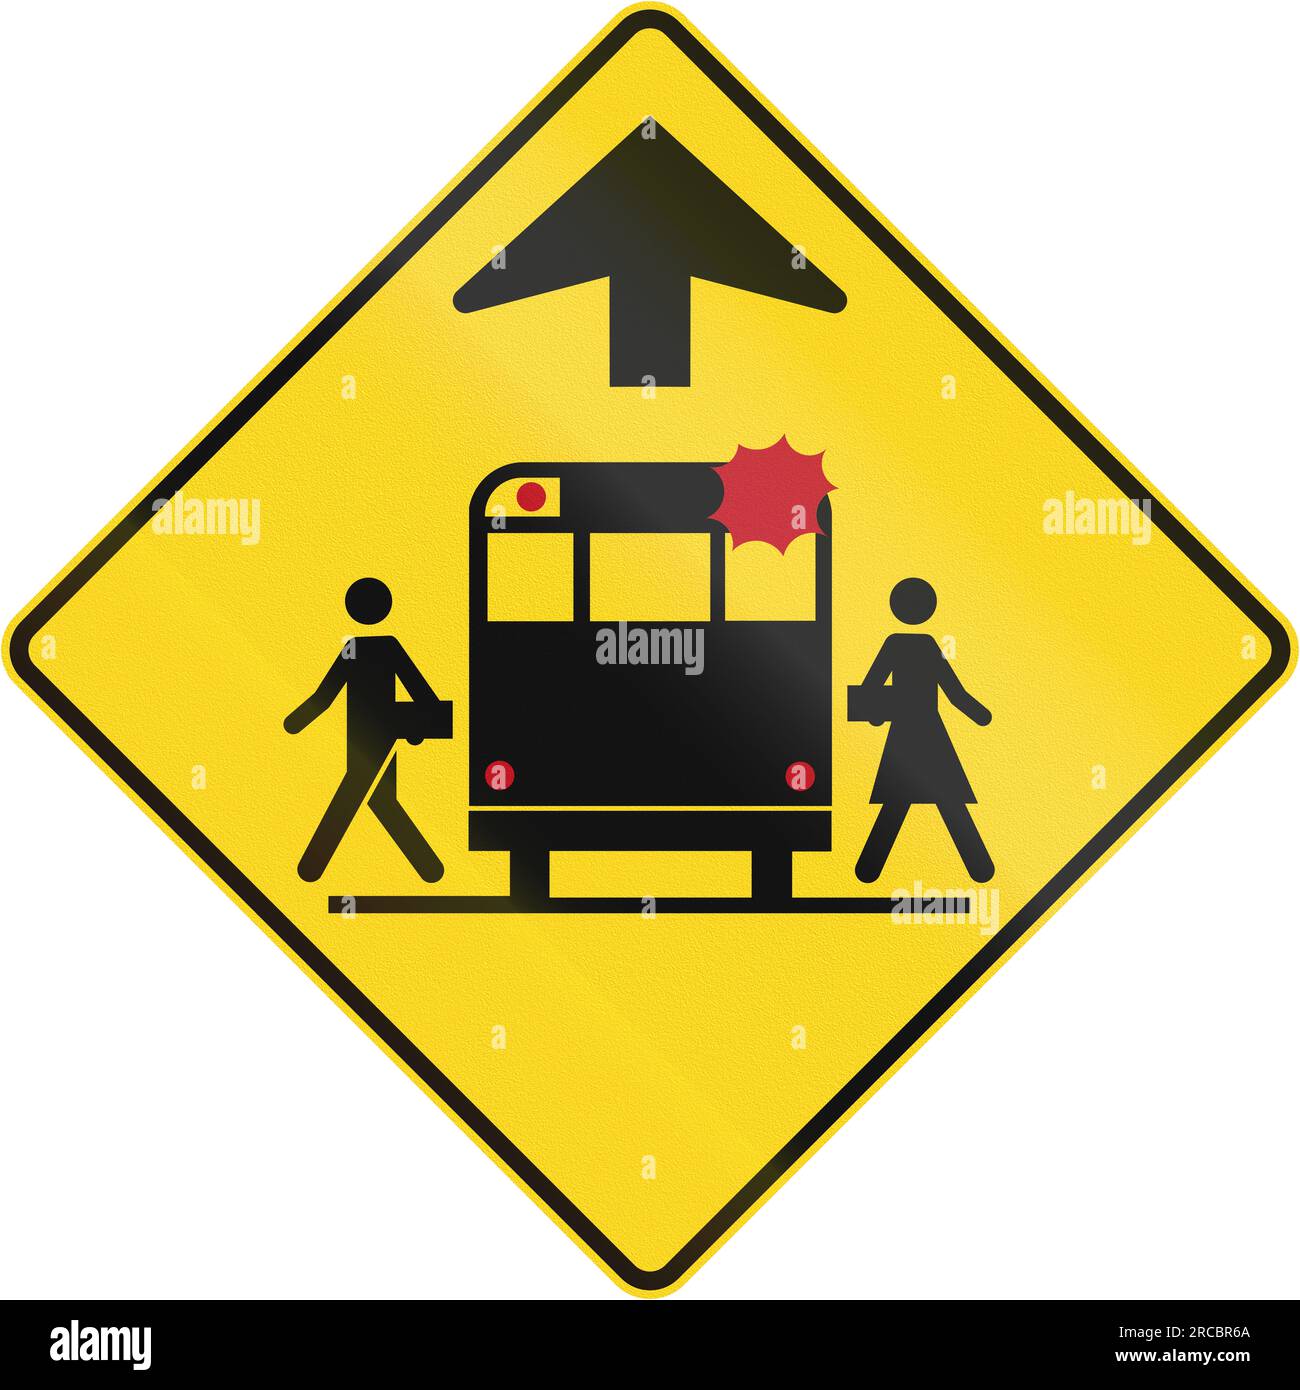 Canadian school warning sign - School bus stop ahead. This sign is used in Quebec. Stock Photo